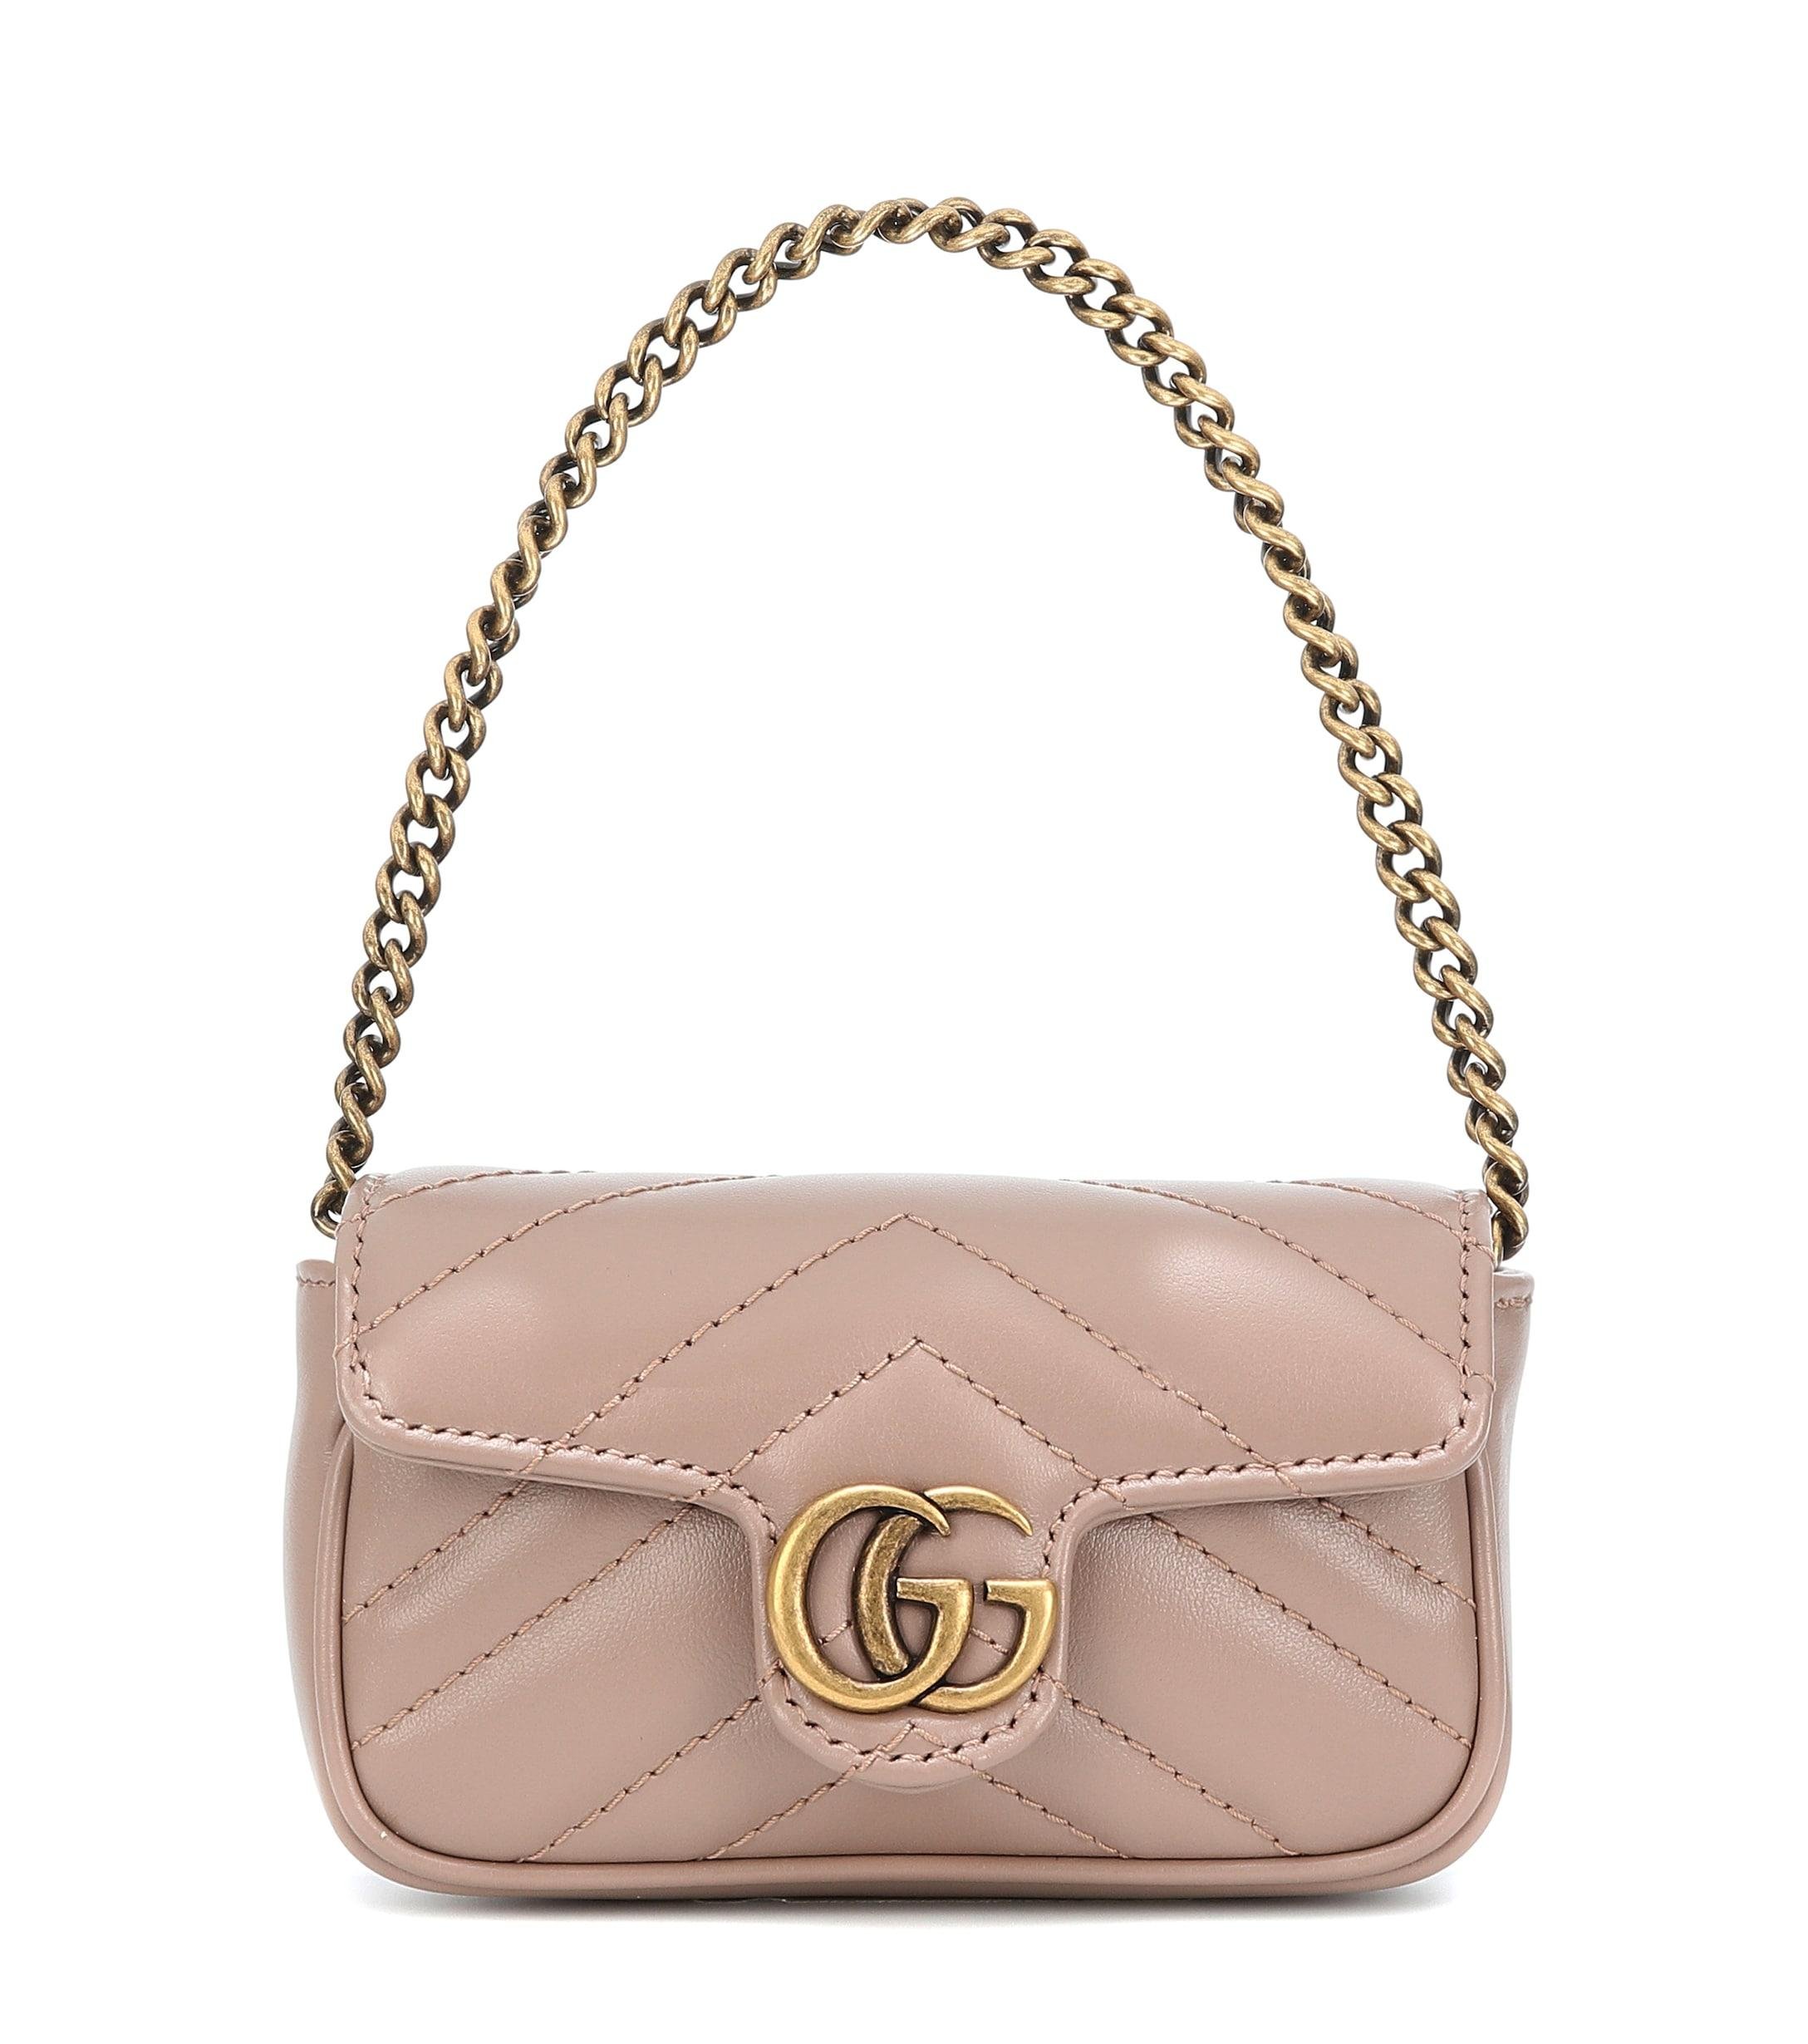 GG Marmont Micro Leather Shoulder Bag